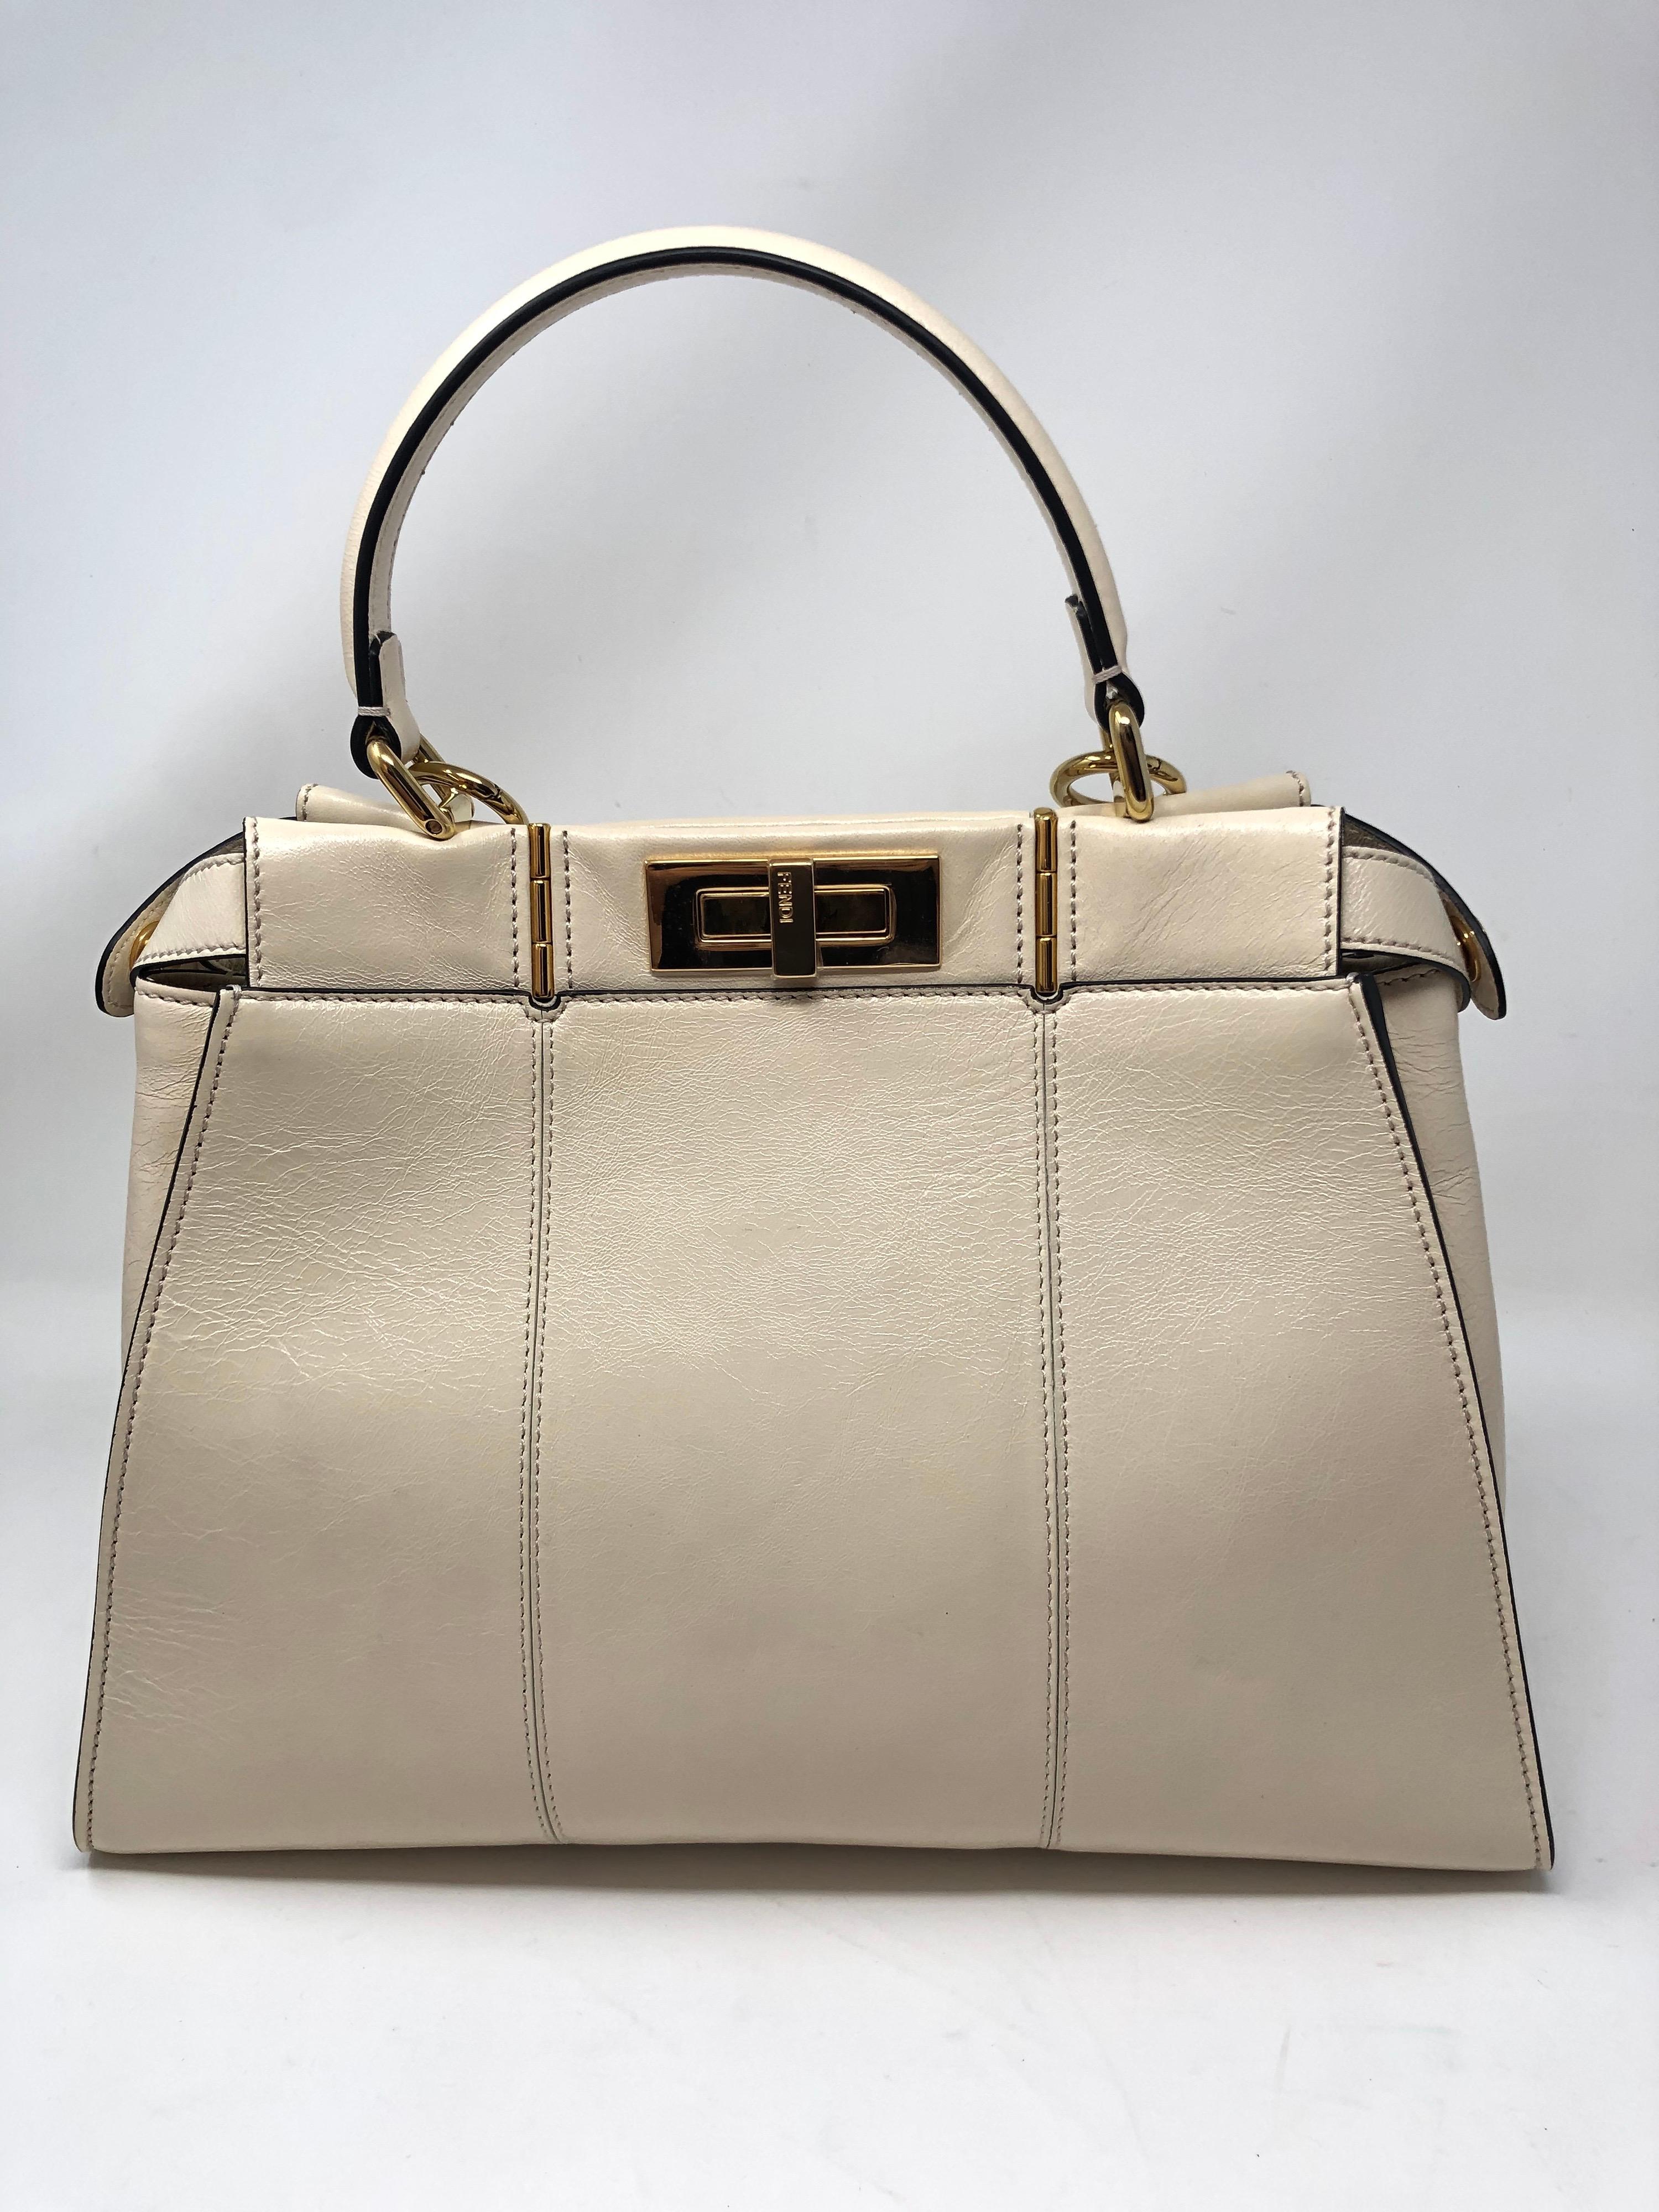 Fendi Cream Peekaboo Bag. Brand new and never used. Retail over $6,000. Can be worn 2 ways. Beautiful bag with lots of details. Guaranteed authentic. 